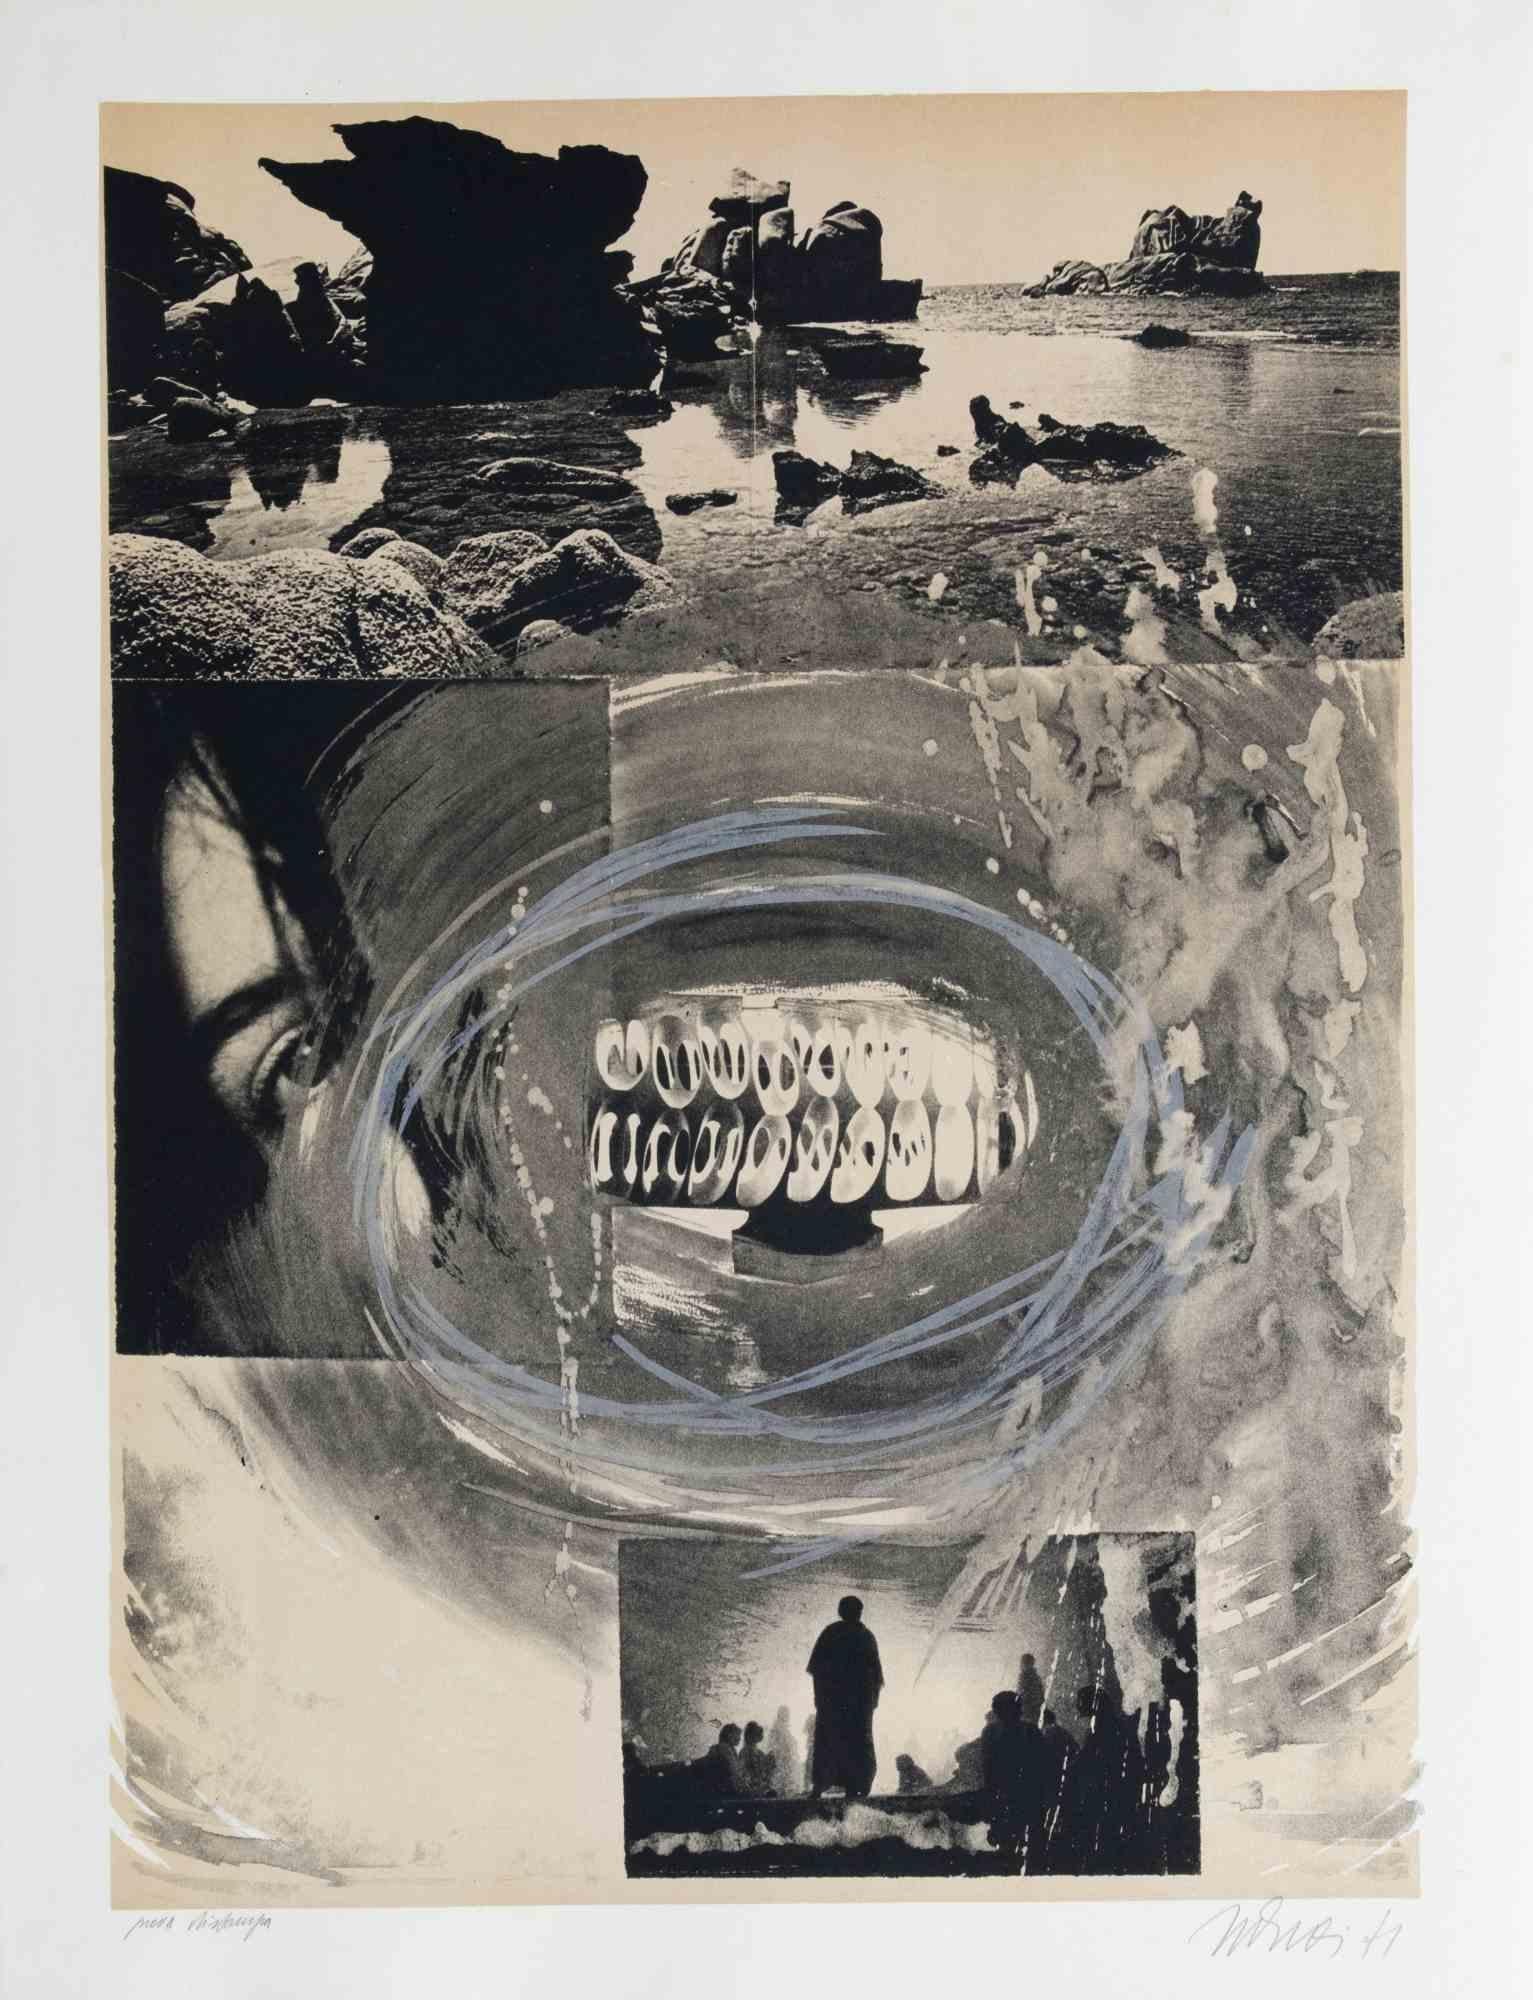 The Mouth of the Time is a contemporary artwork realized by Nani Tedeschi in 1971.

Black and white lithograph.

Hand signed and dated on the lower margin.

Artist's proof